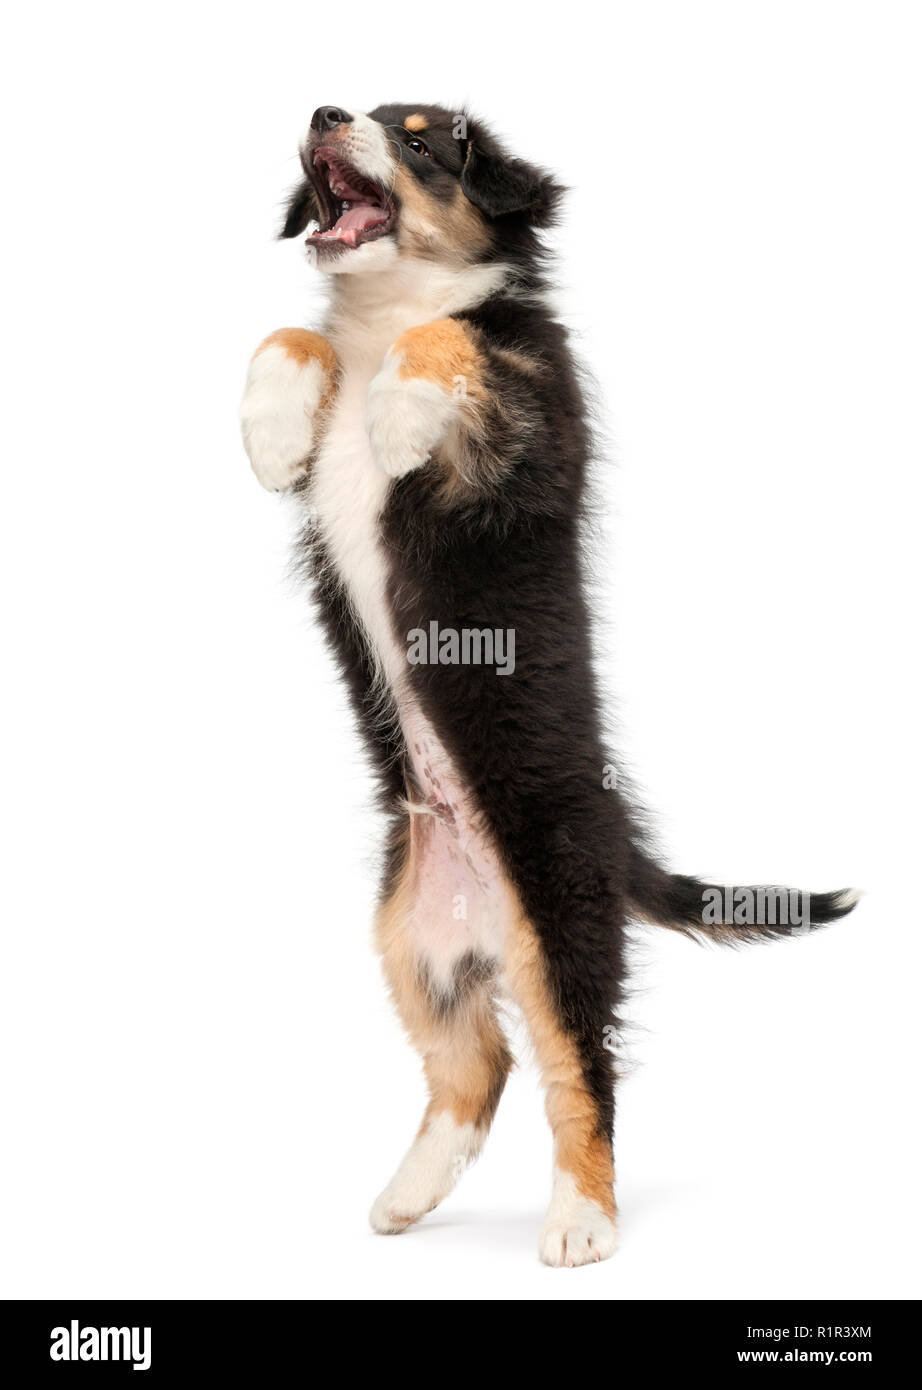 Australian Shepherd puppy, 2 months old, standing on its hind legs against white background Stock Photo